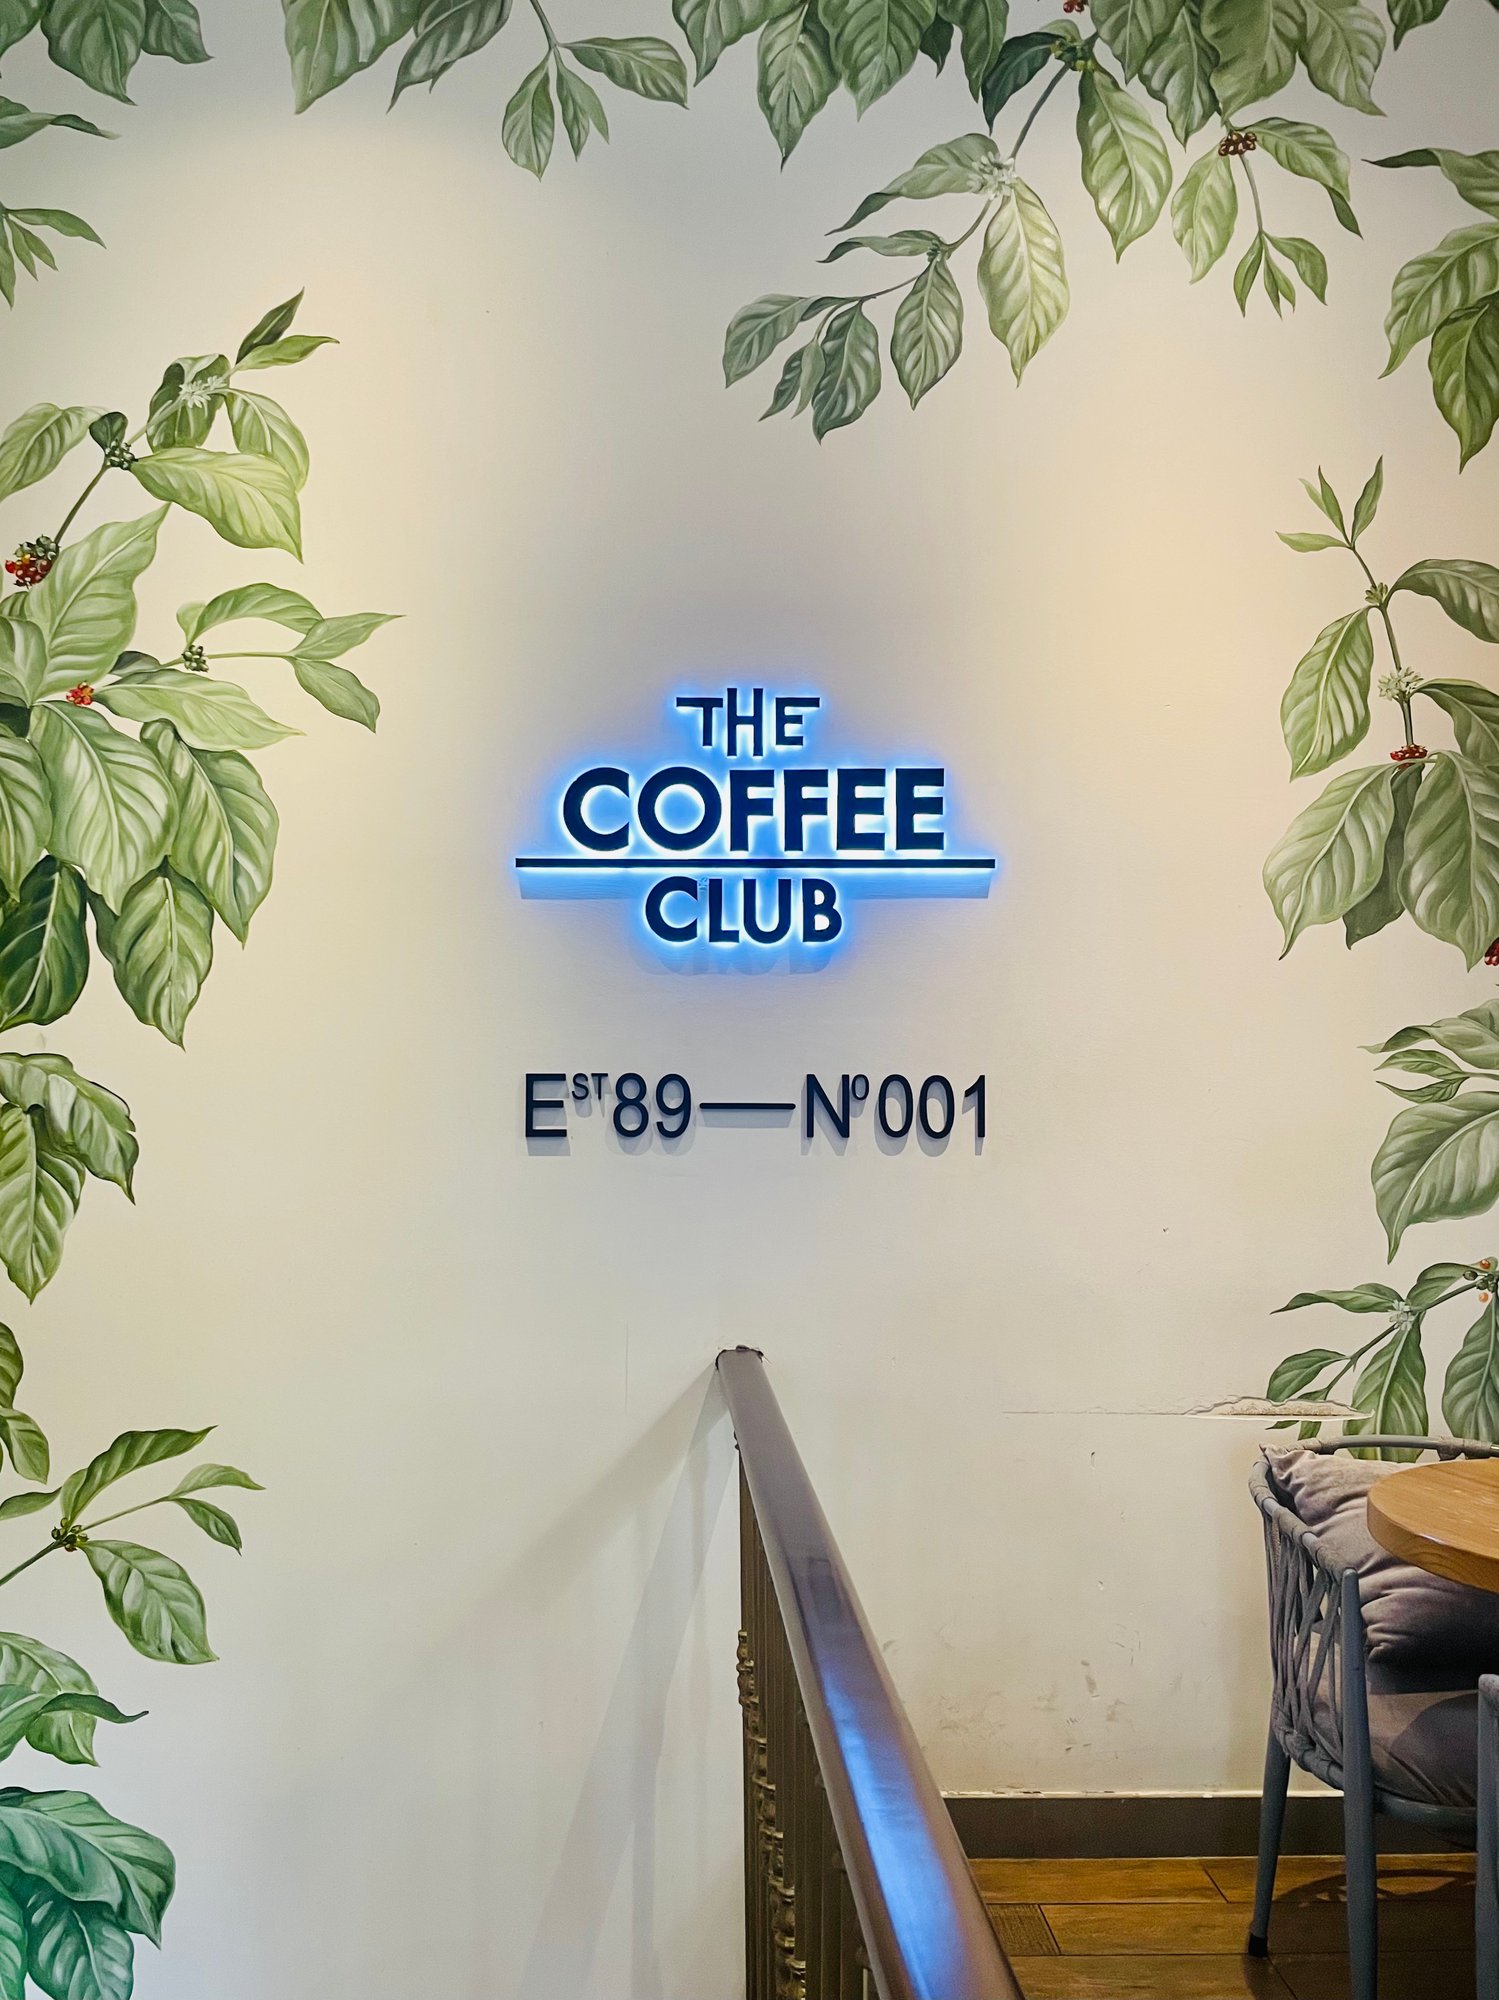 The Coffee Club on the wall